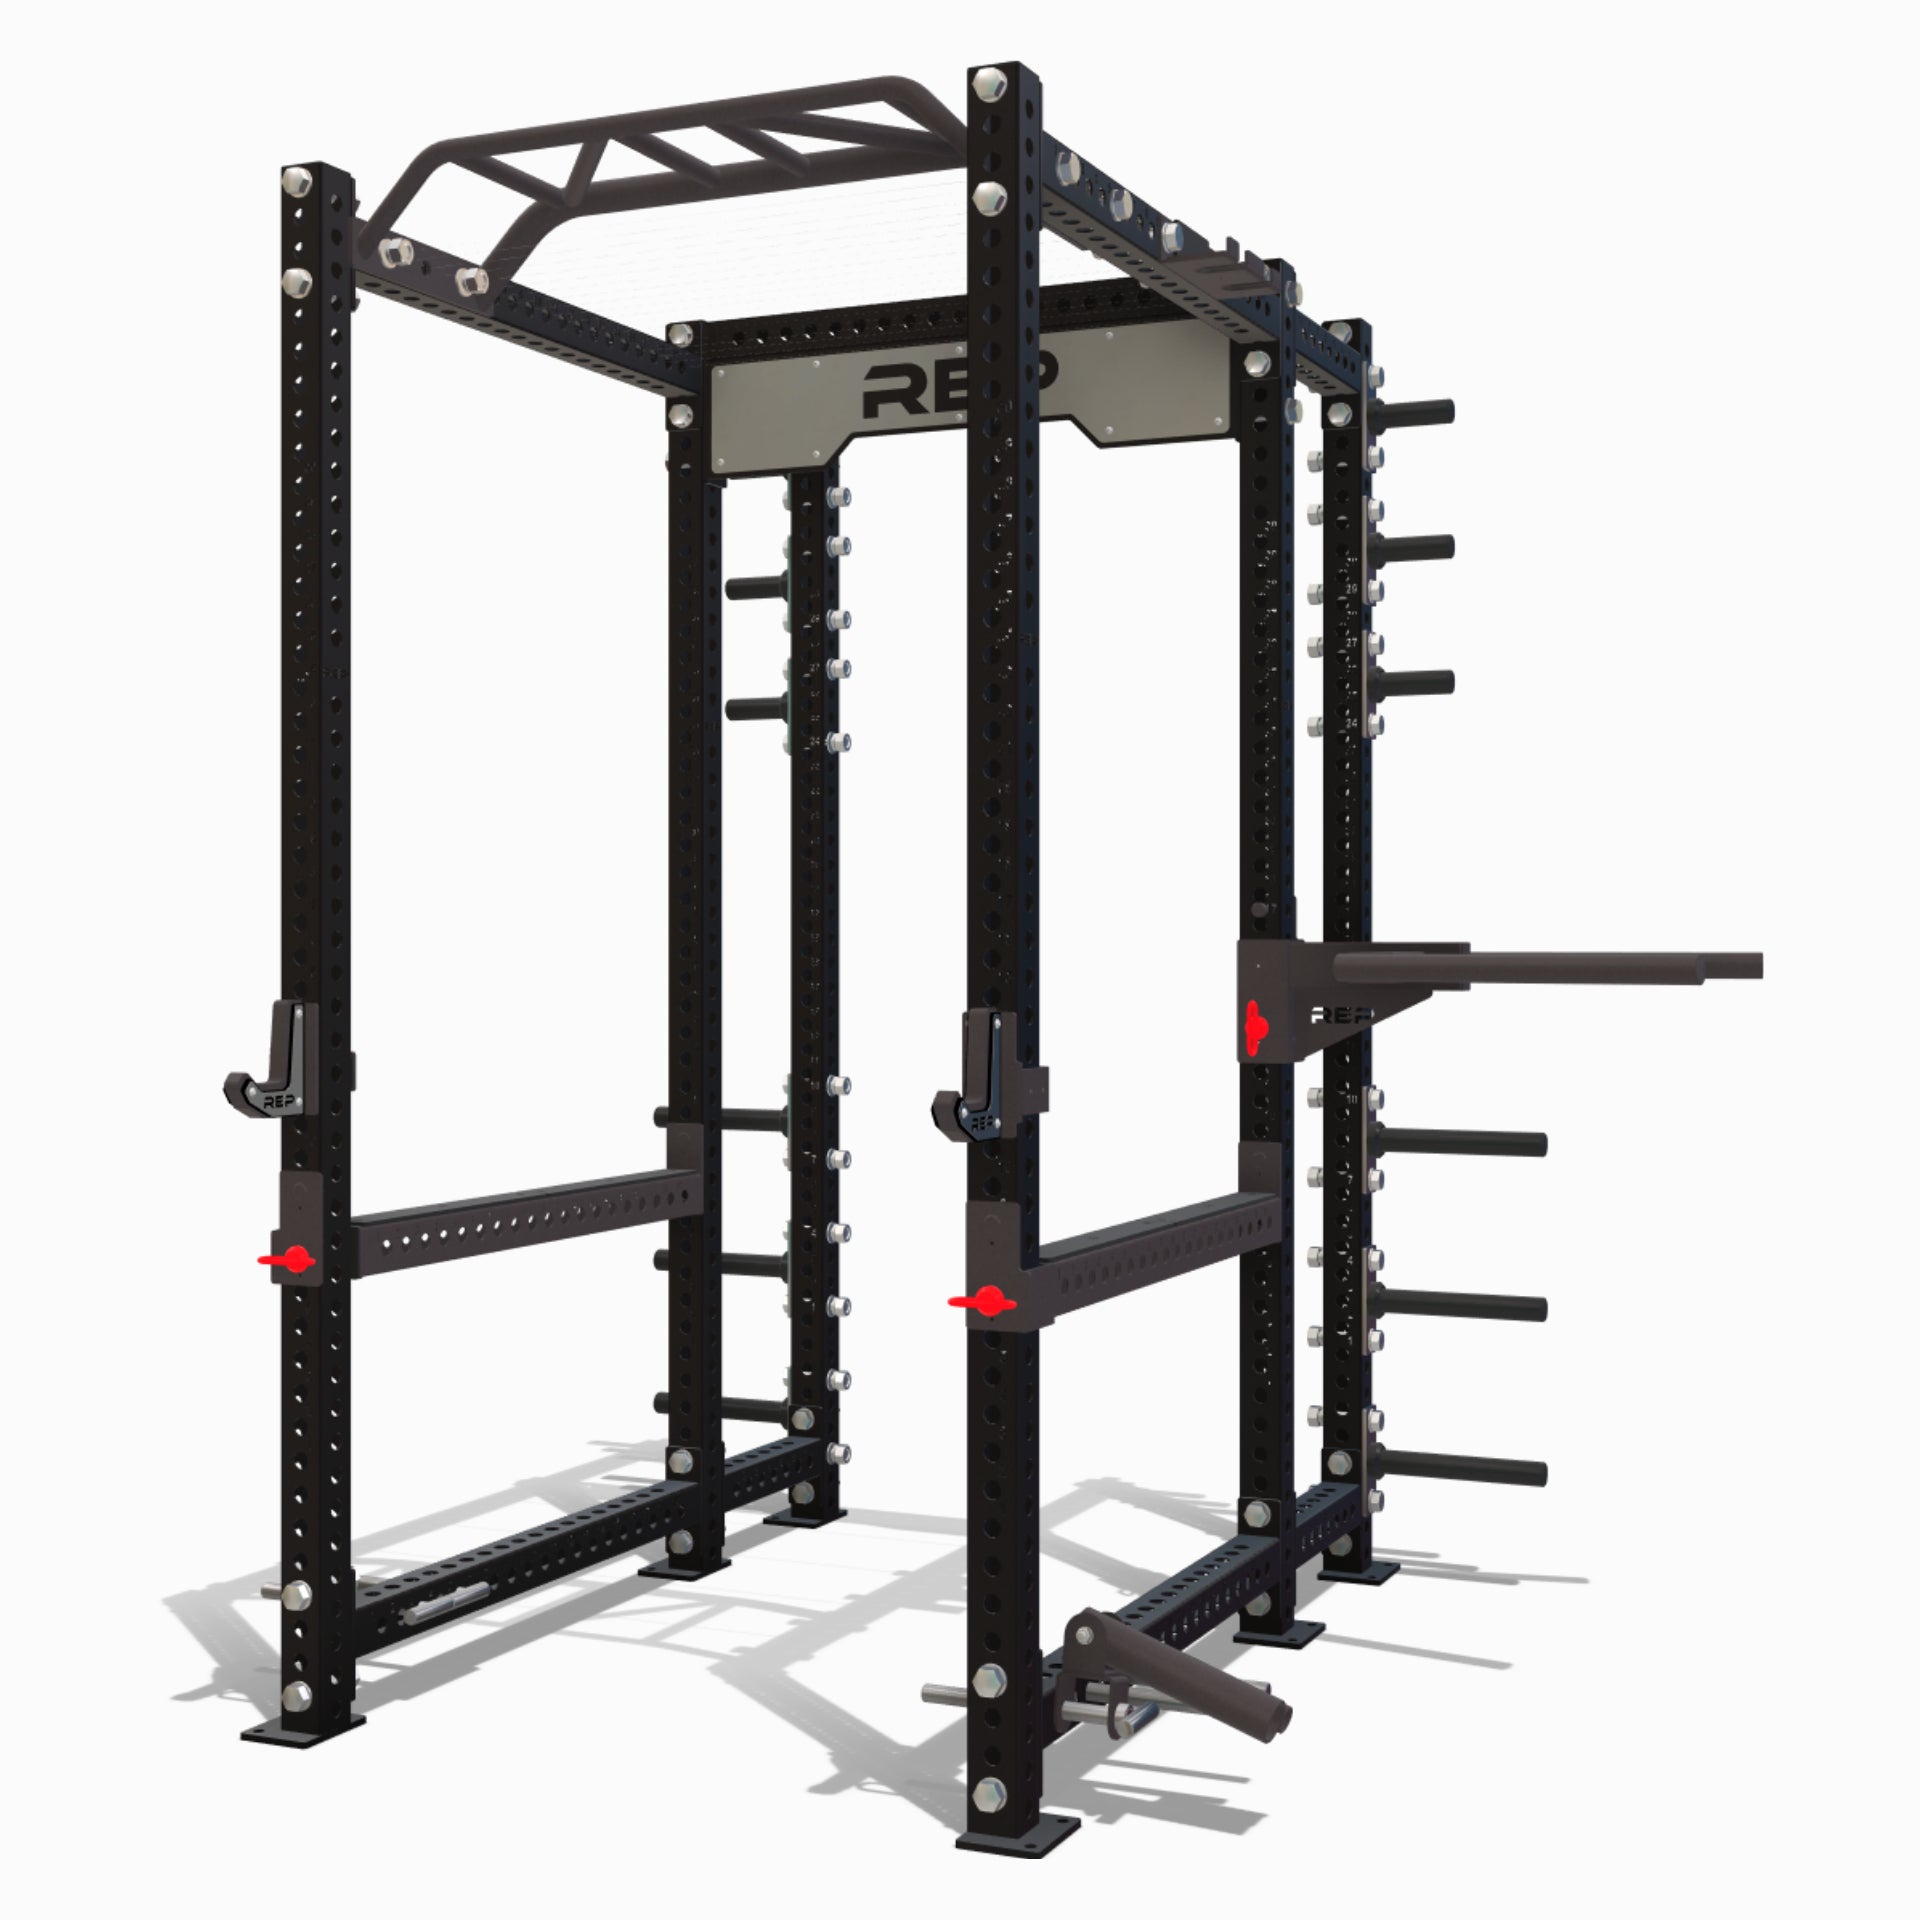 PR-5000 Power Rack Pre-Selected 6-Post with High-End Attachment Package. Includes Multi-Grip Pull-Up Bar, Flat Sandwich J-Cups, Flip-Down Safeties, Dip Station, Landmine Attachment, and Band Pegs.